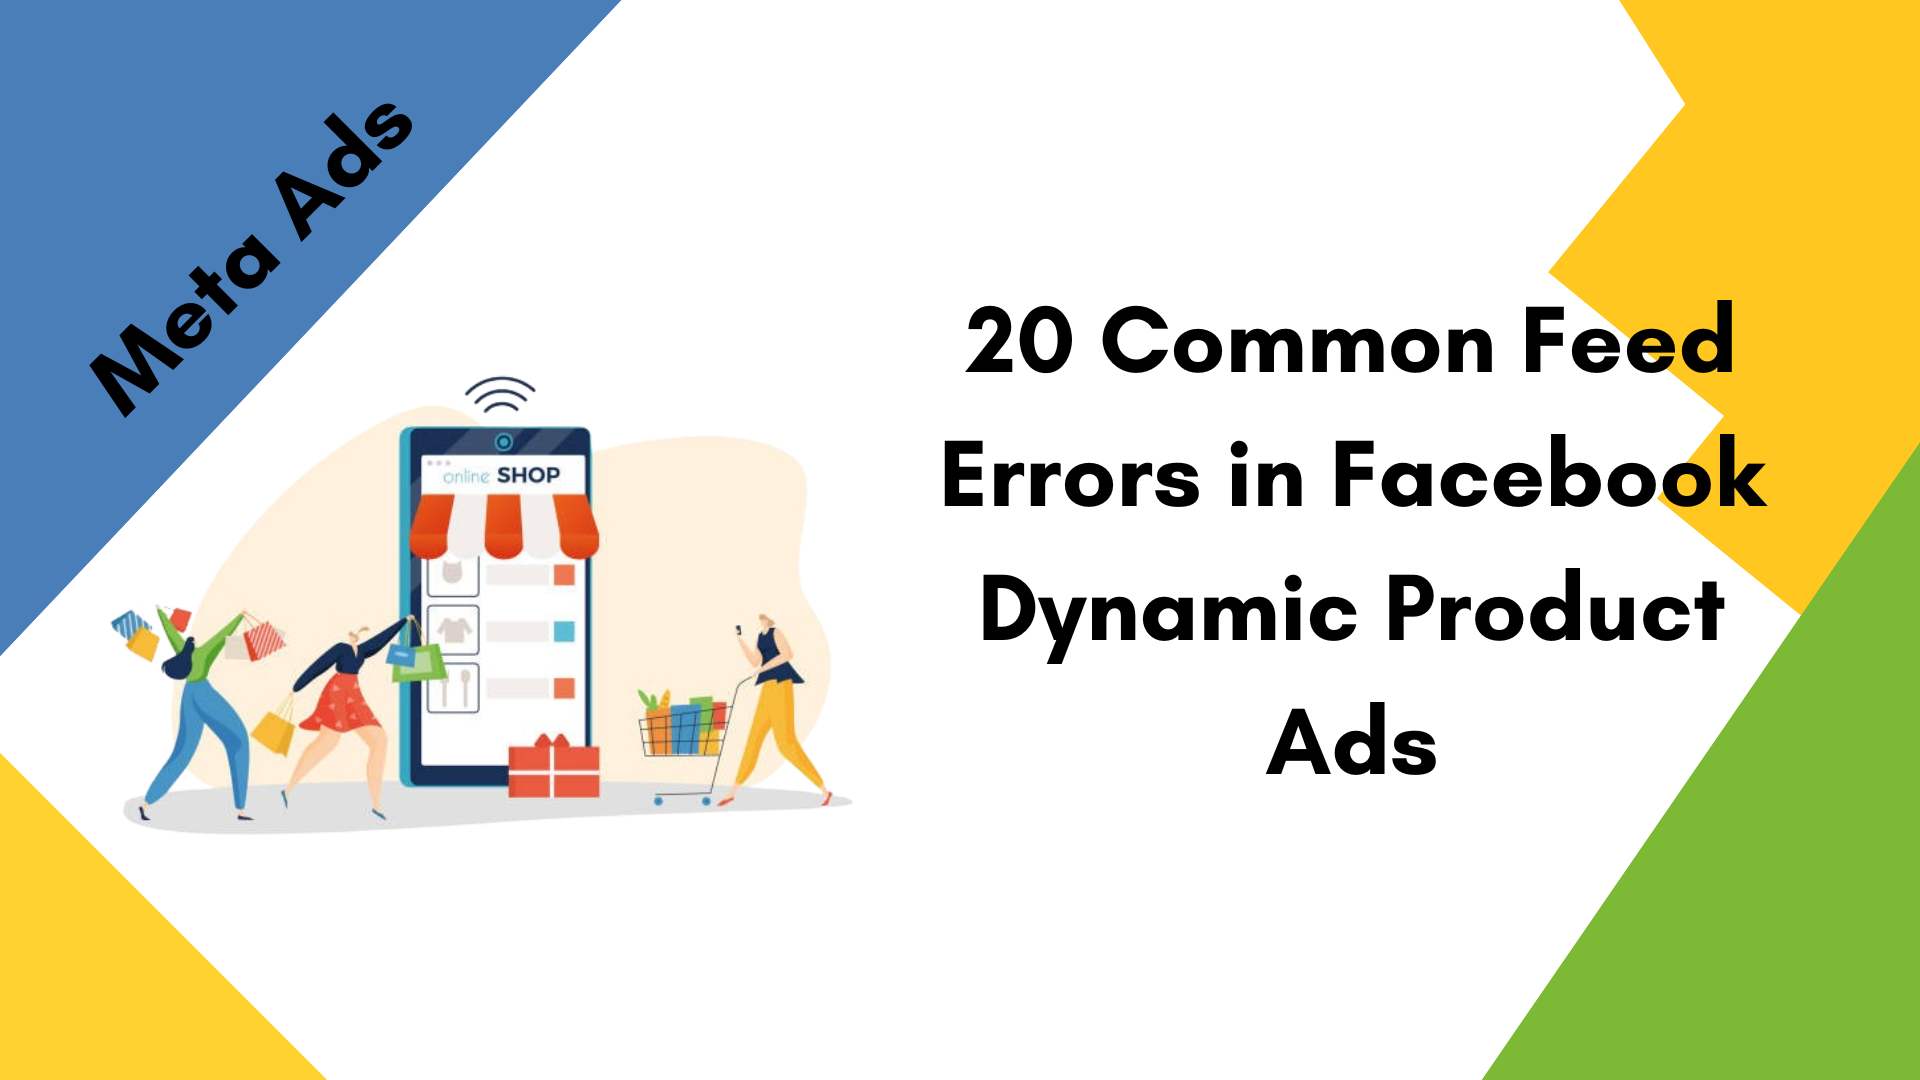 Identifying 20 Common Feed Errors in Facebook Dynamic Product Ads